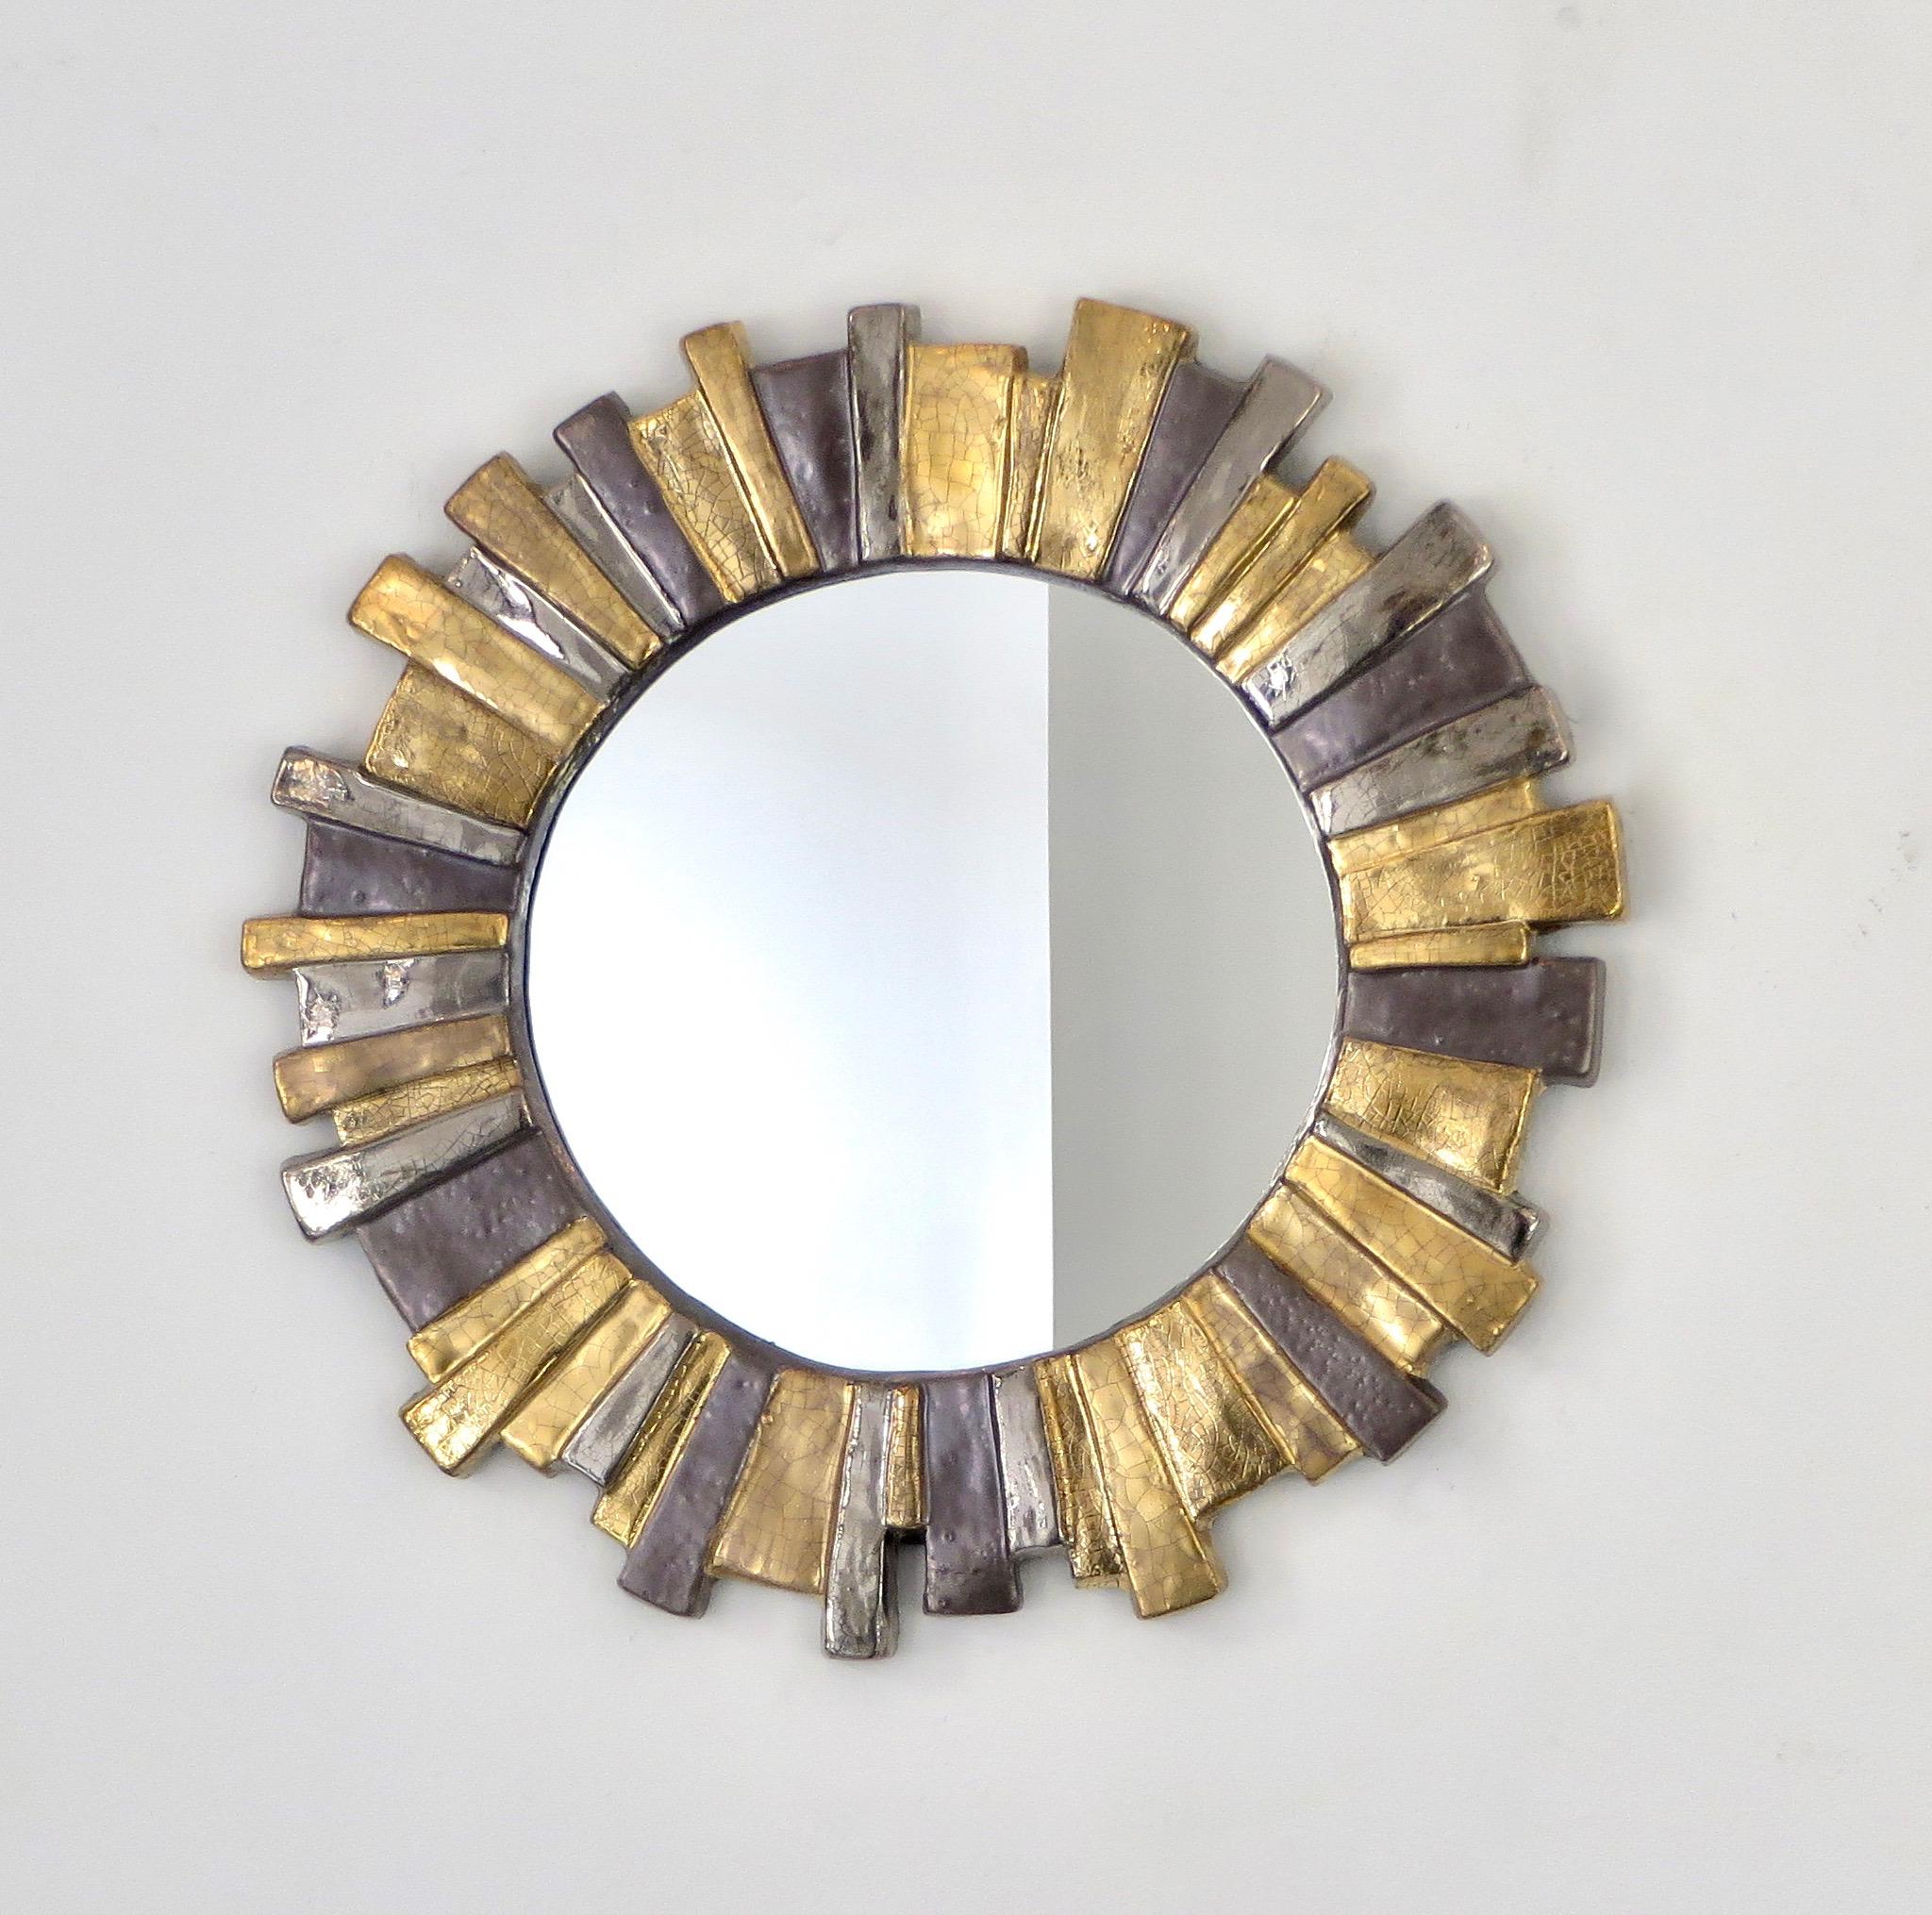 Francois Lembo handmade gold, grey and silver ceramic crackle glazed sunburst mirror. 
France, 1970s. In very good original condition with felt backing.
An very unusual and rare model in its abstract form and asymmetrical form.
A native of